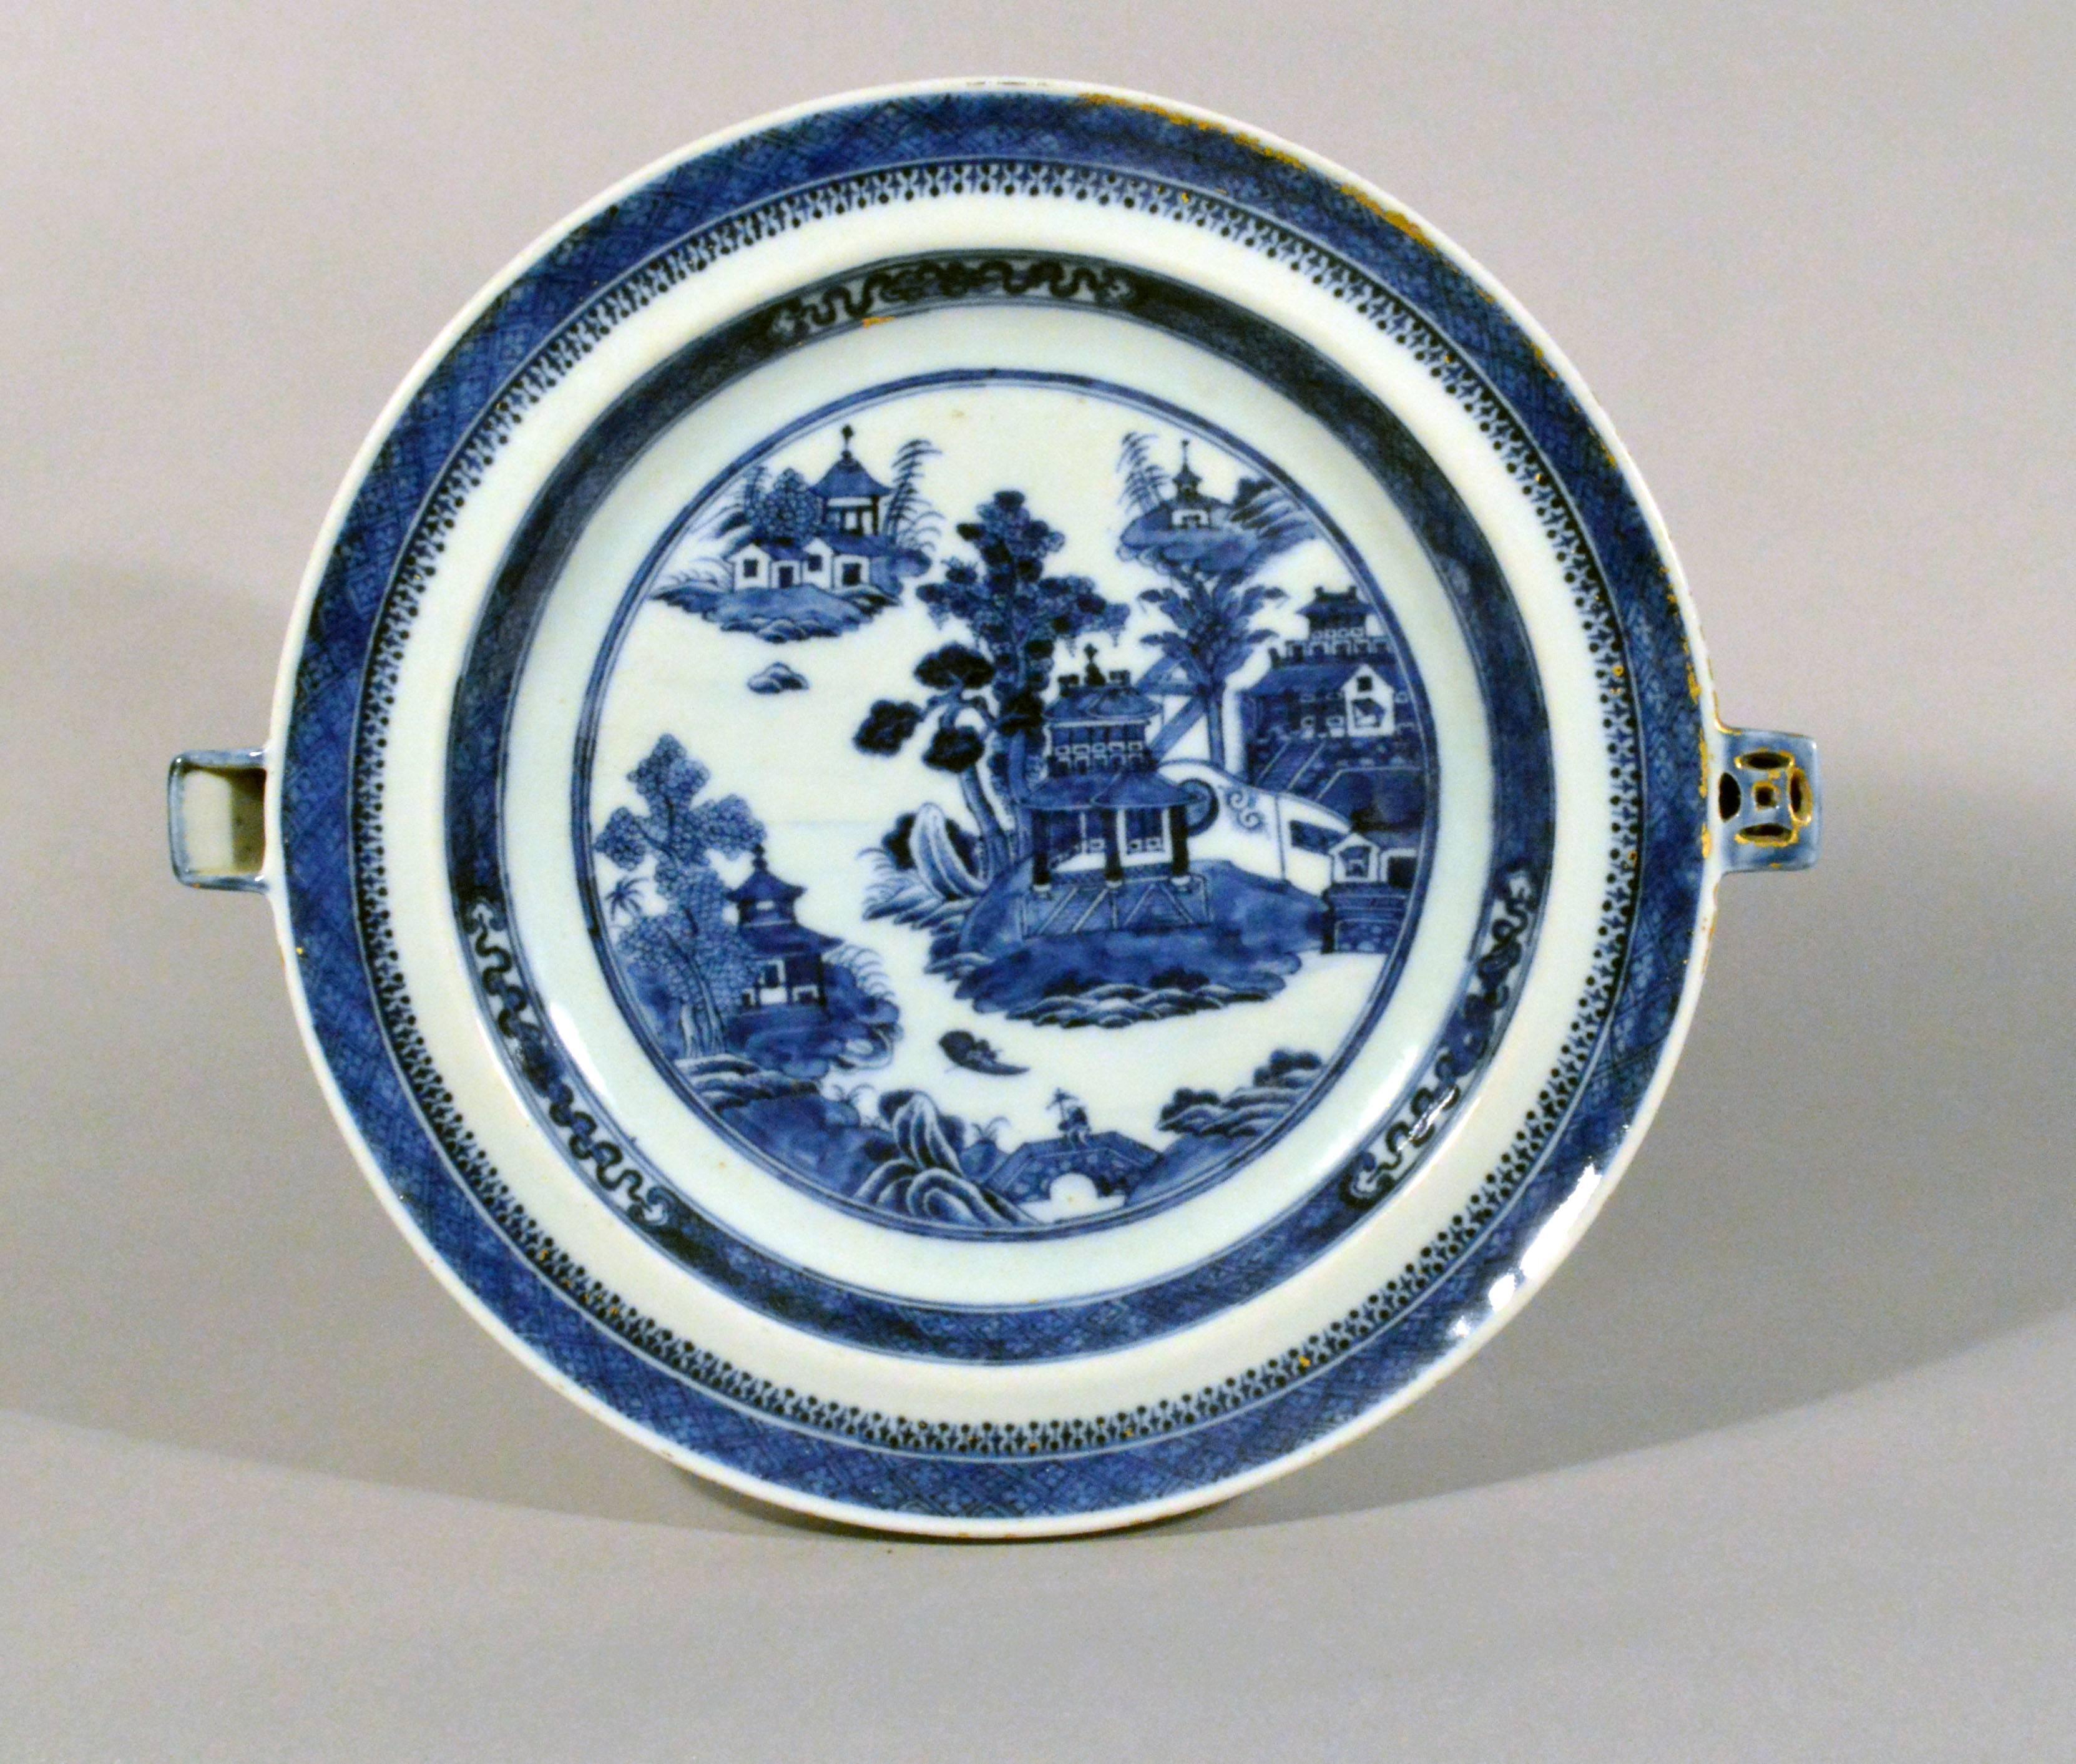 Chinese export blue and white porcelain hot water plates, 
circa 1780-1800.

The Chinese export porcelain underglaze blue and white hot water plates are painted with a riverscape scene with islands and buildings. The border with a diaper band